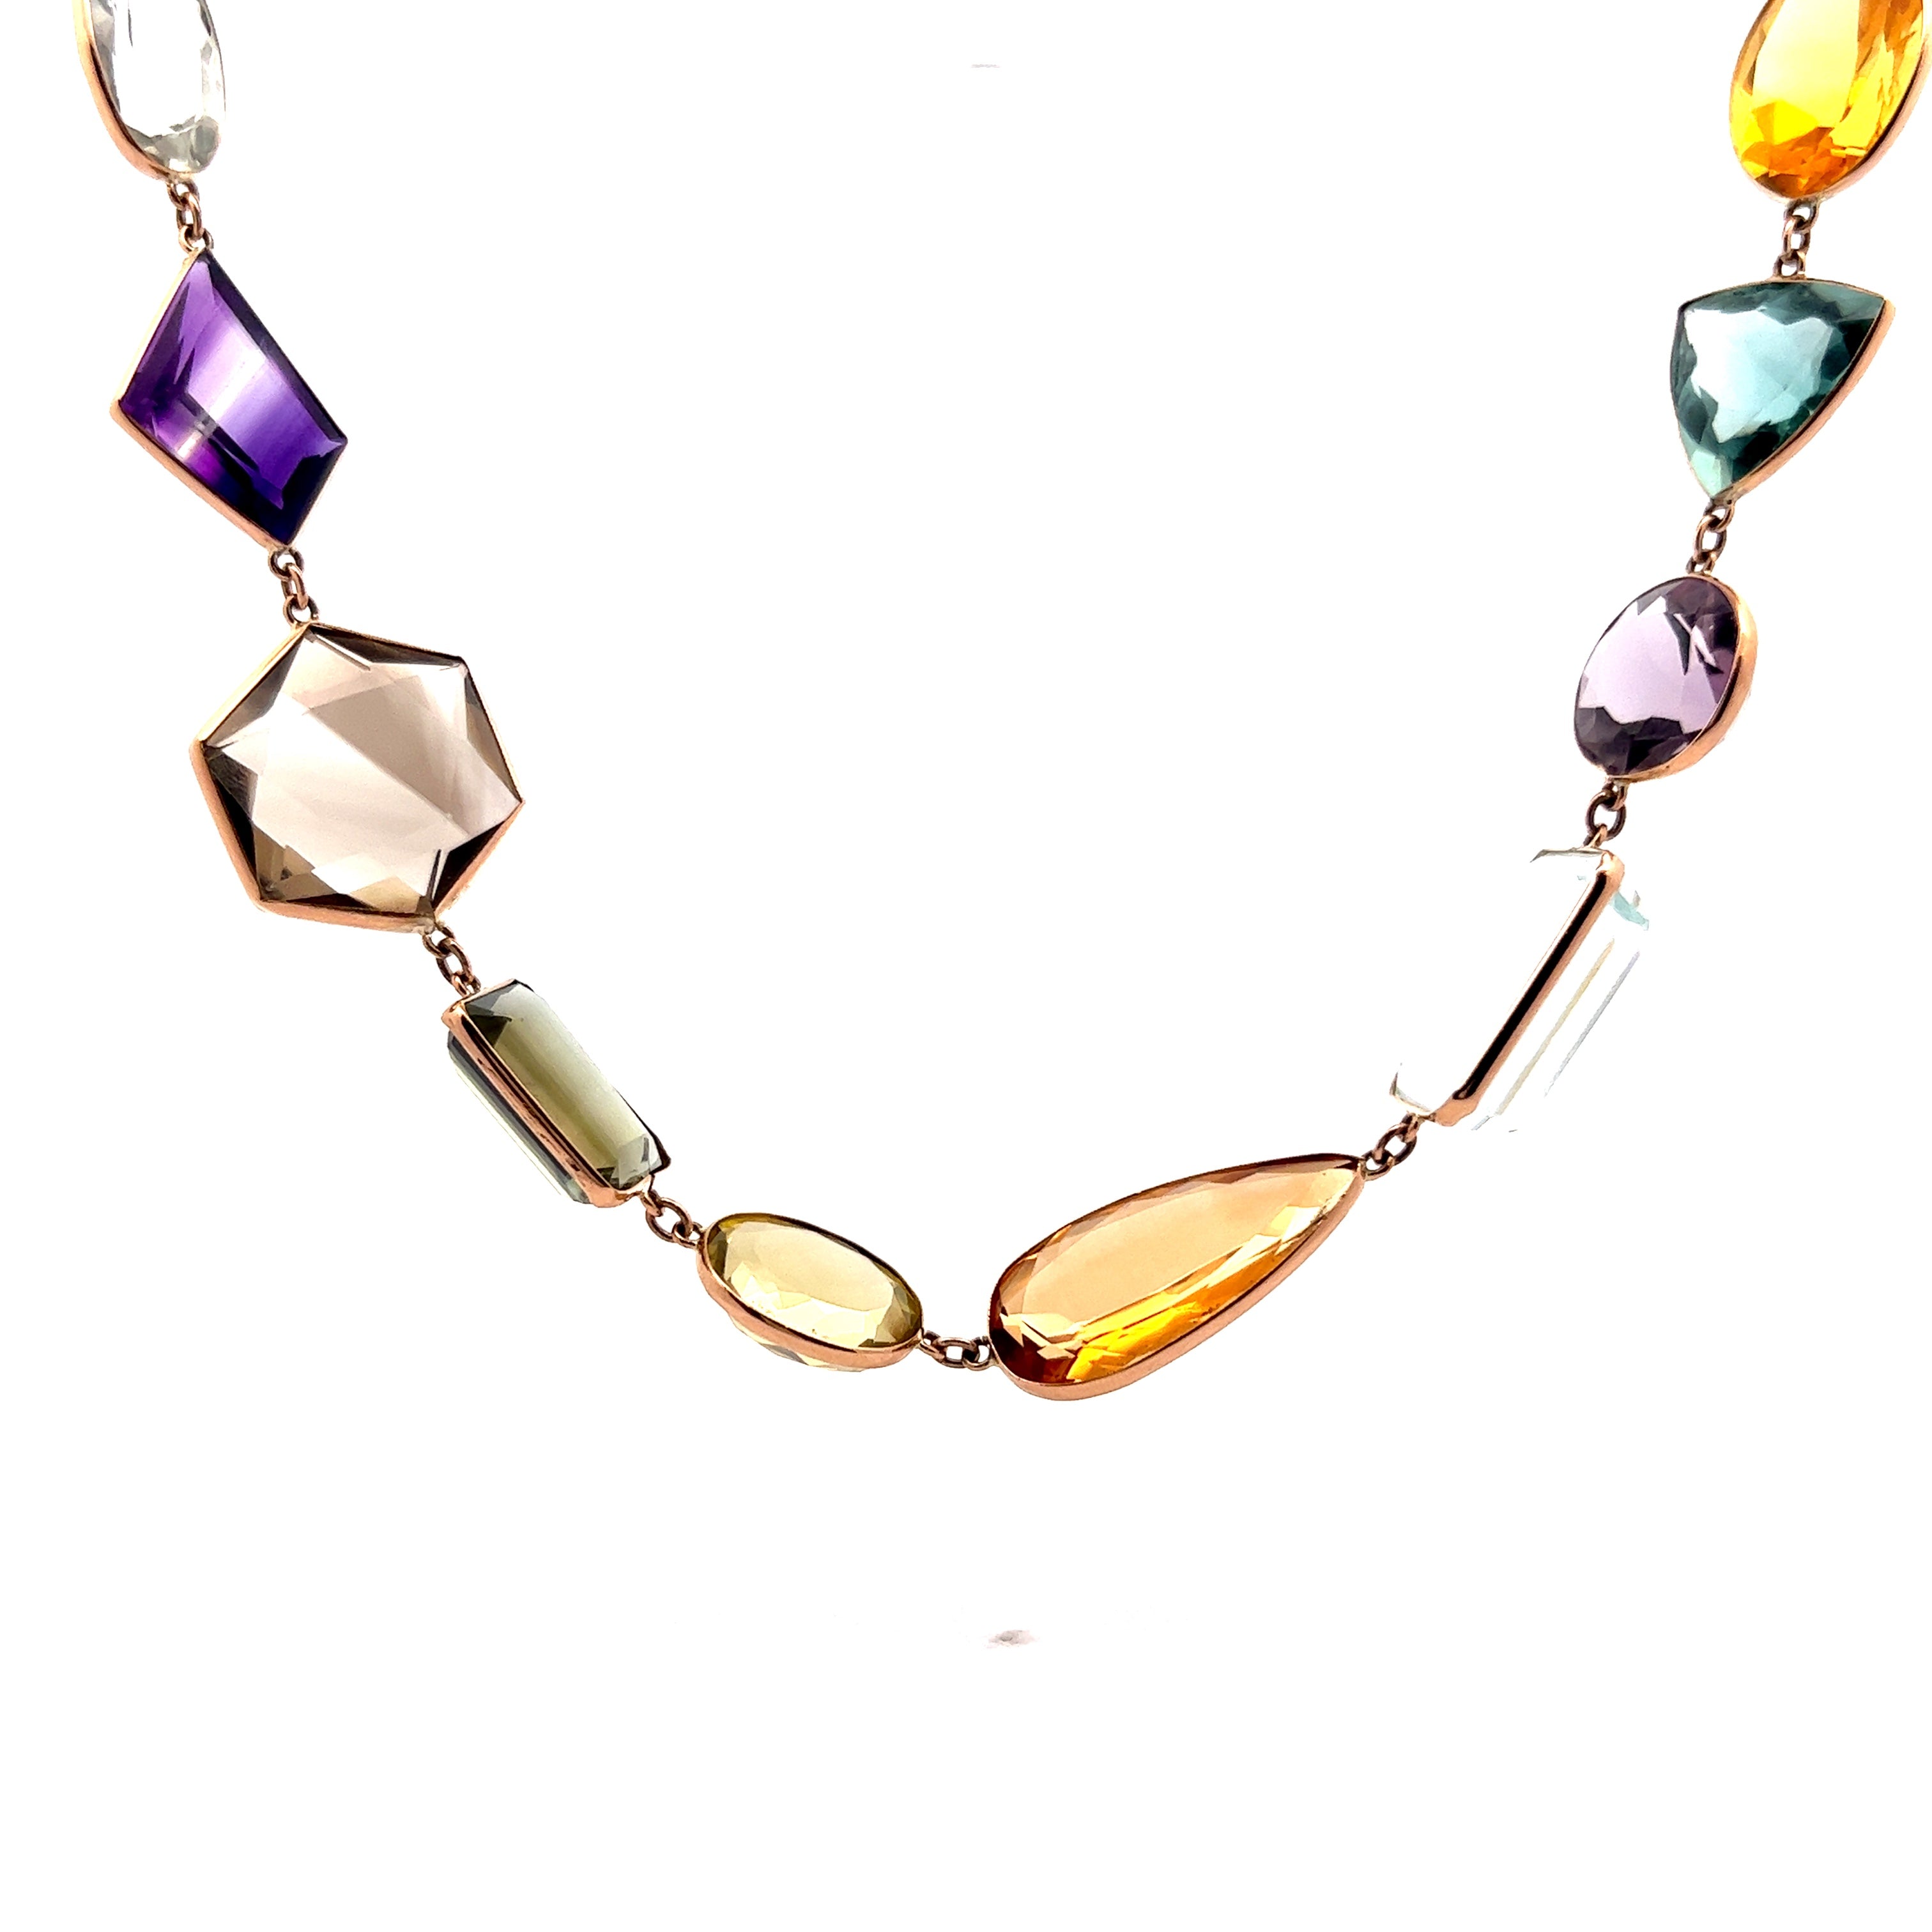 14k Yellow Gold Necklace with Multi-Colored Stones - Zawadee